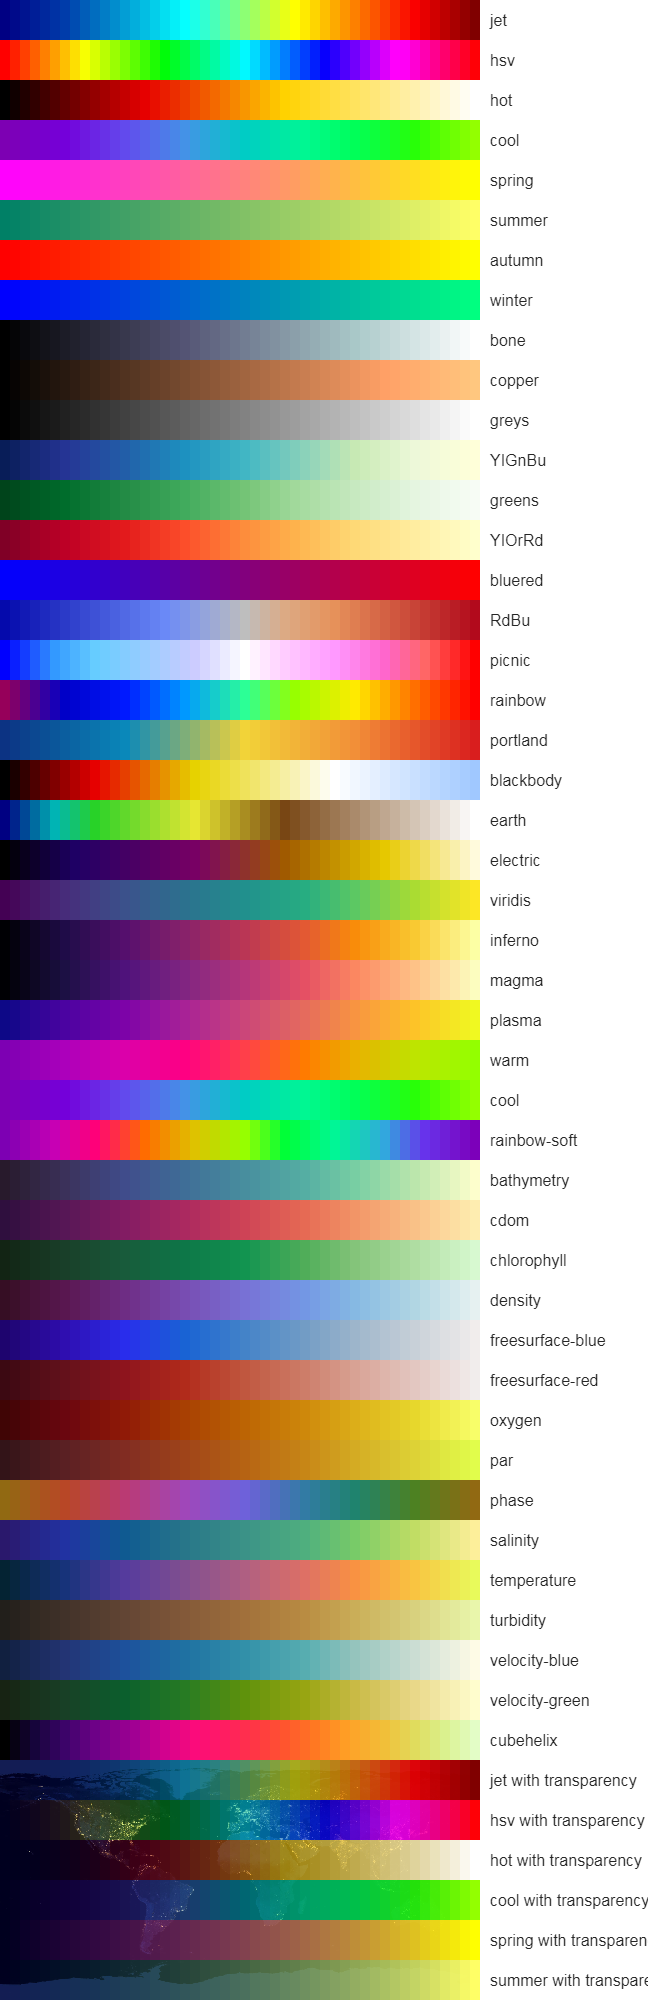 all colormap output